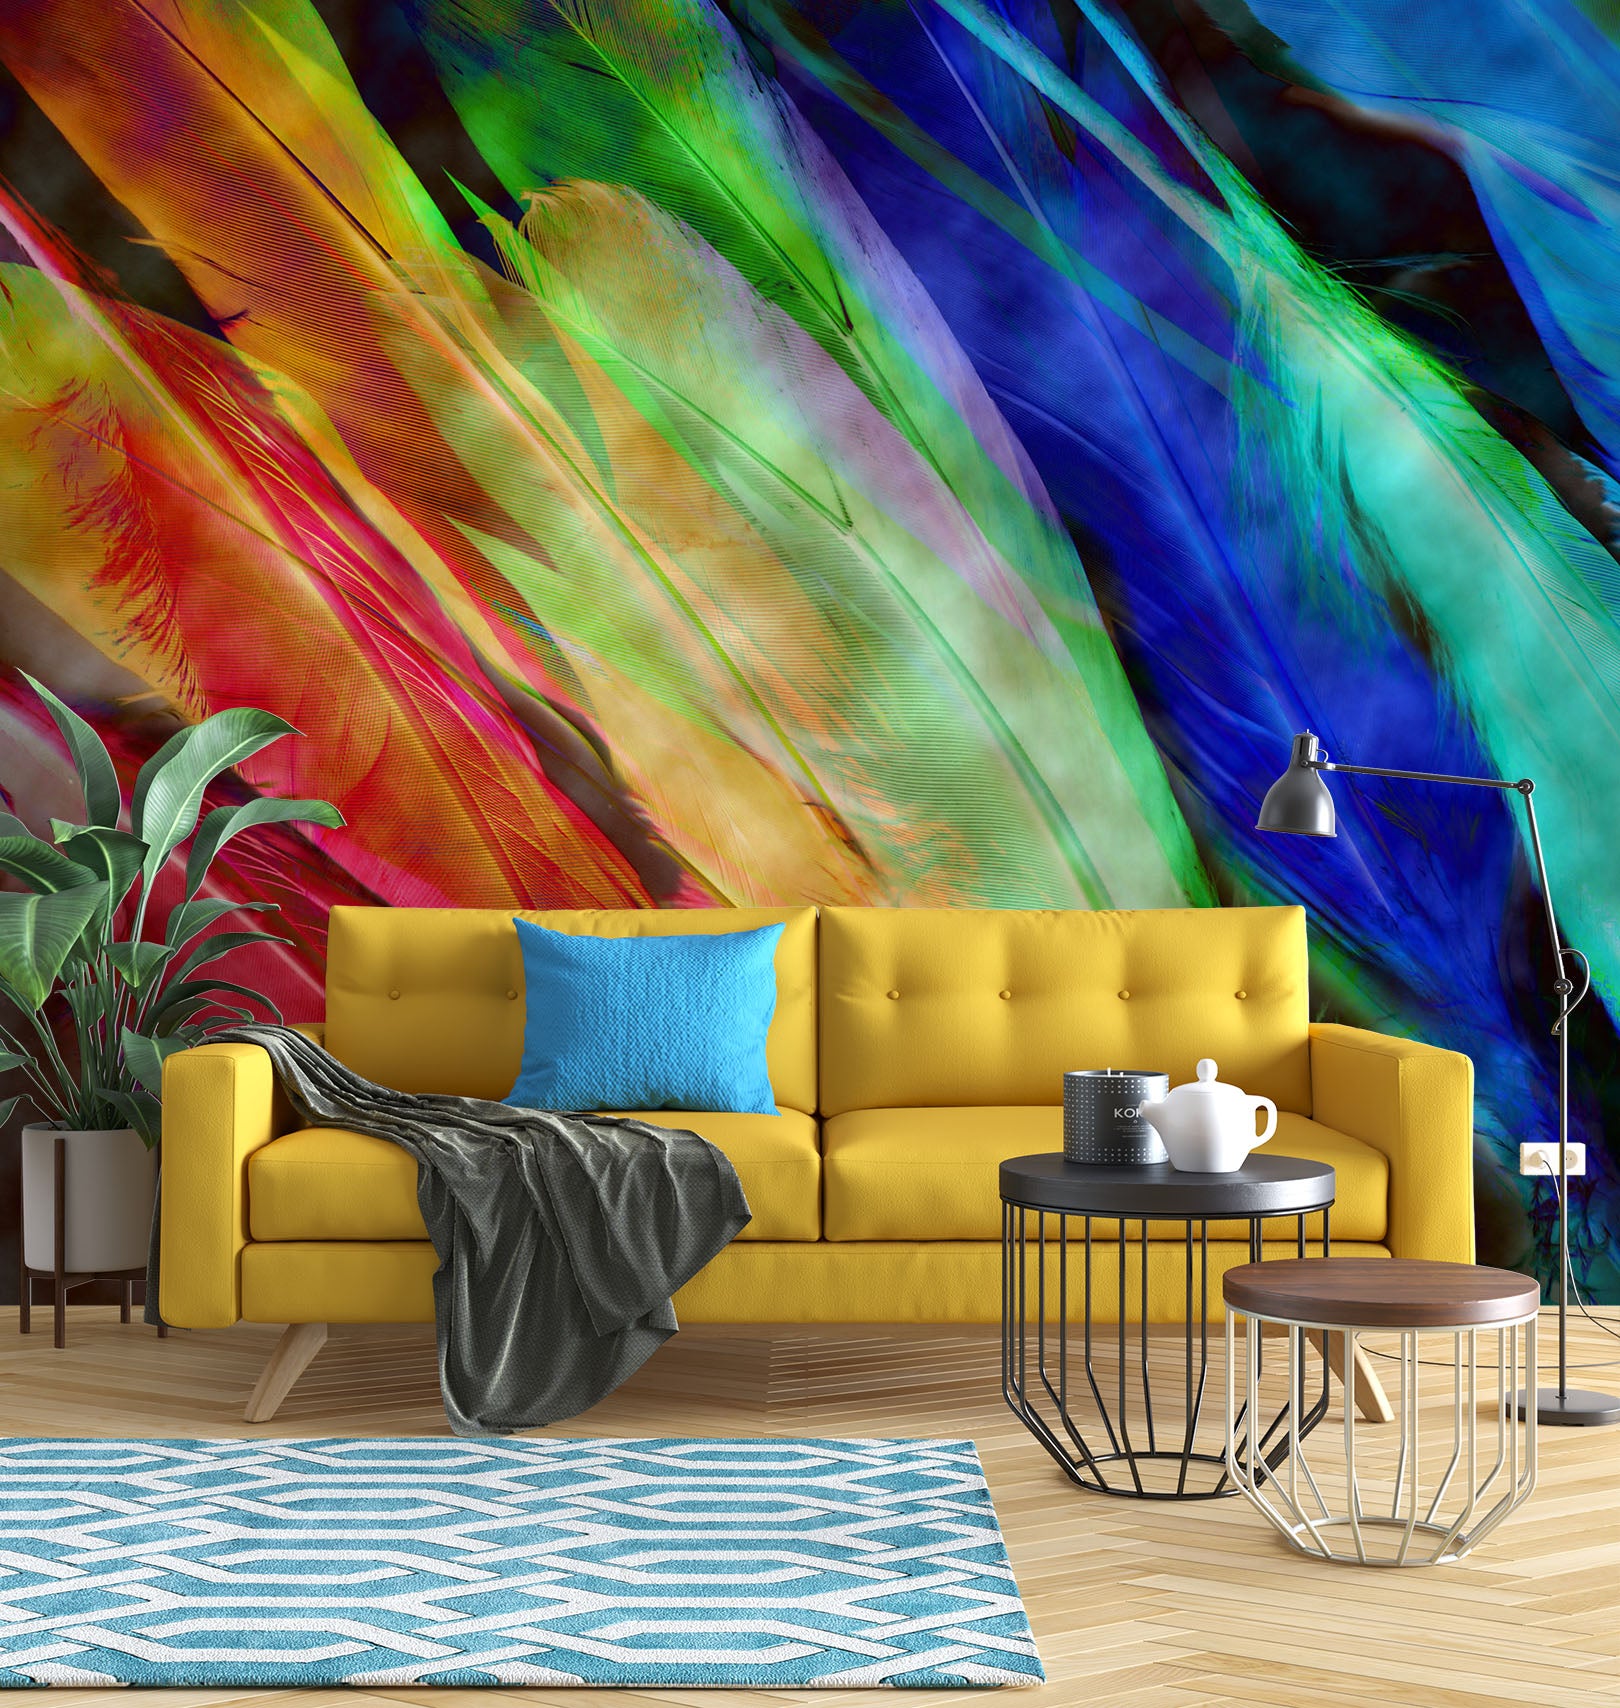 3D Colored Feathers 70105 Shandra Smith Wall Mural Wall Murals